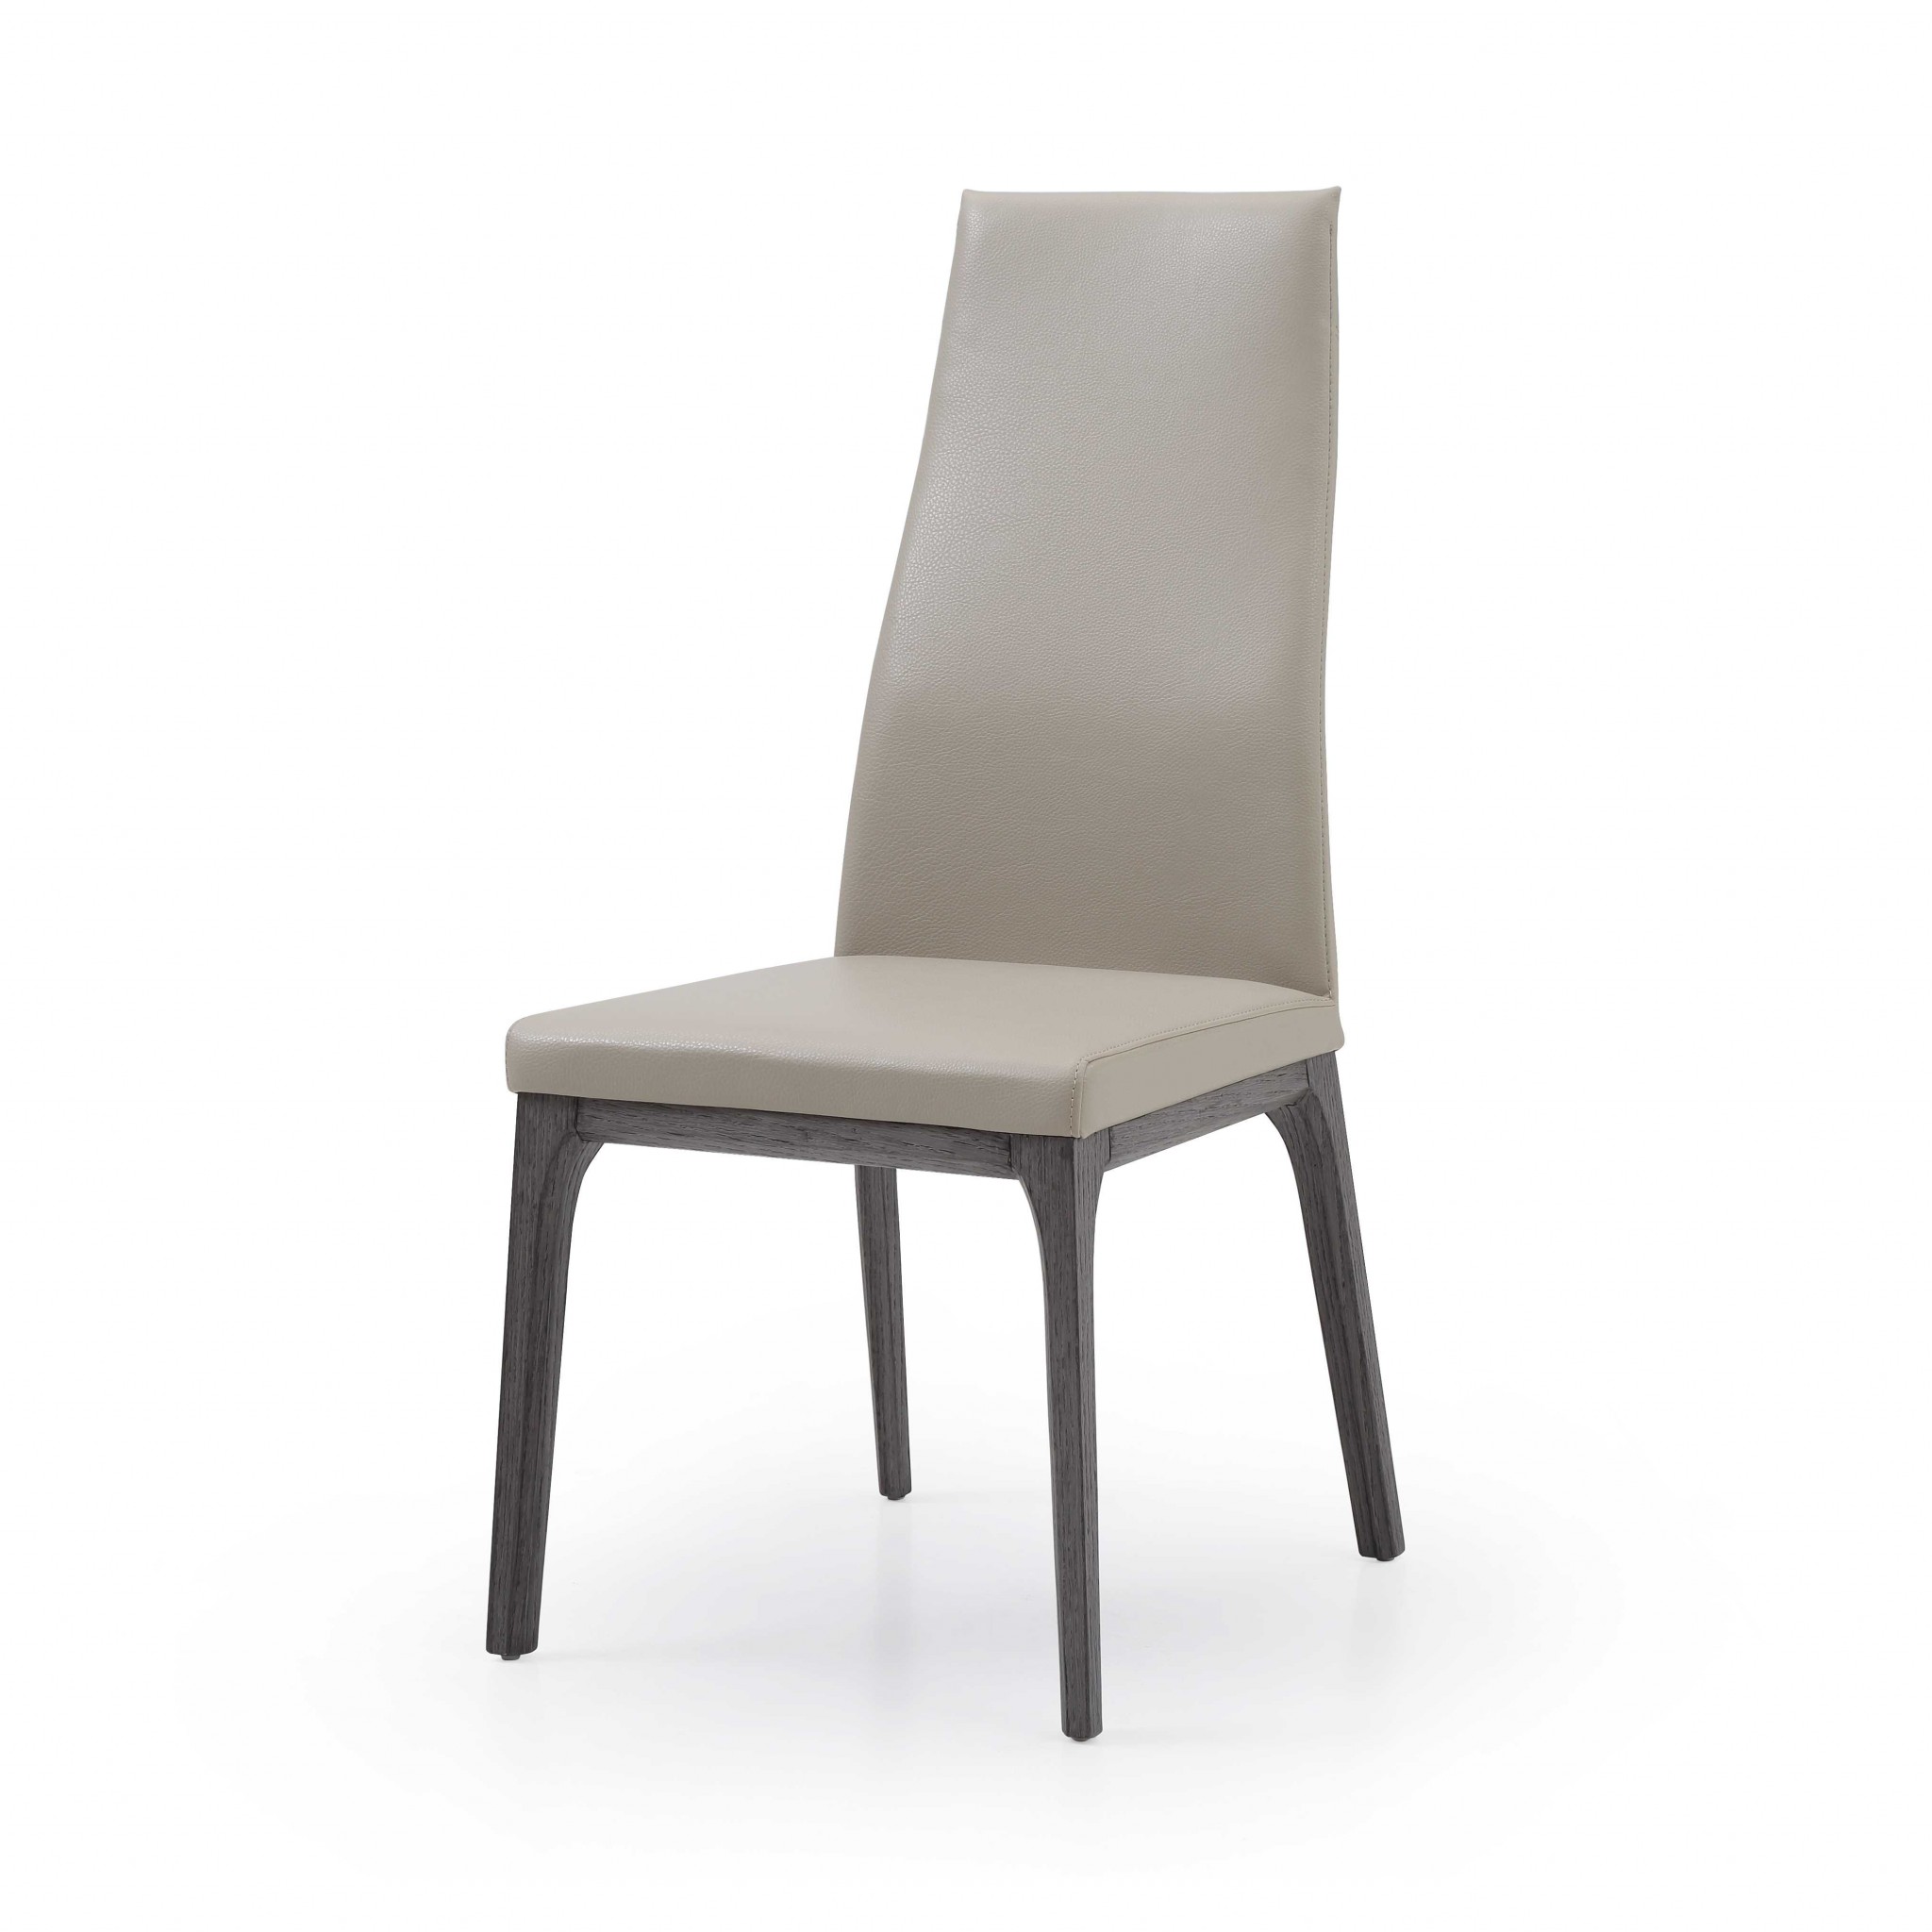 20" X 25" X 42" taupe Faux Leather or Metal Dining Chair